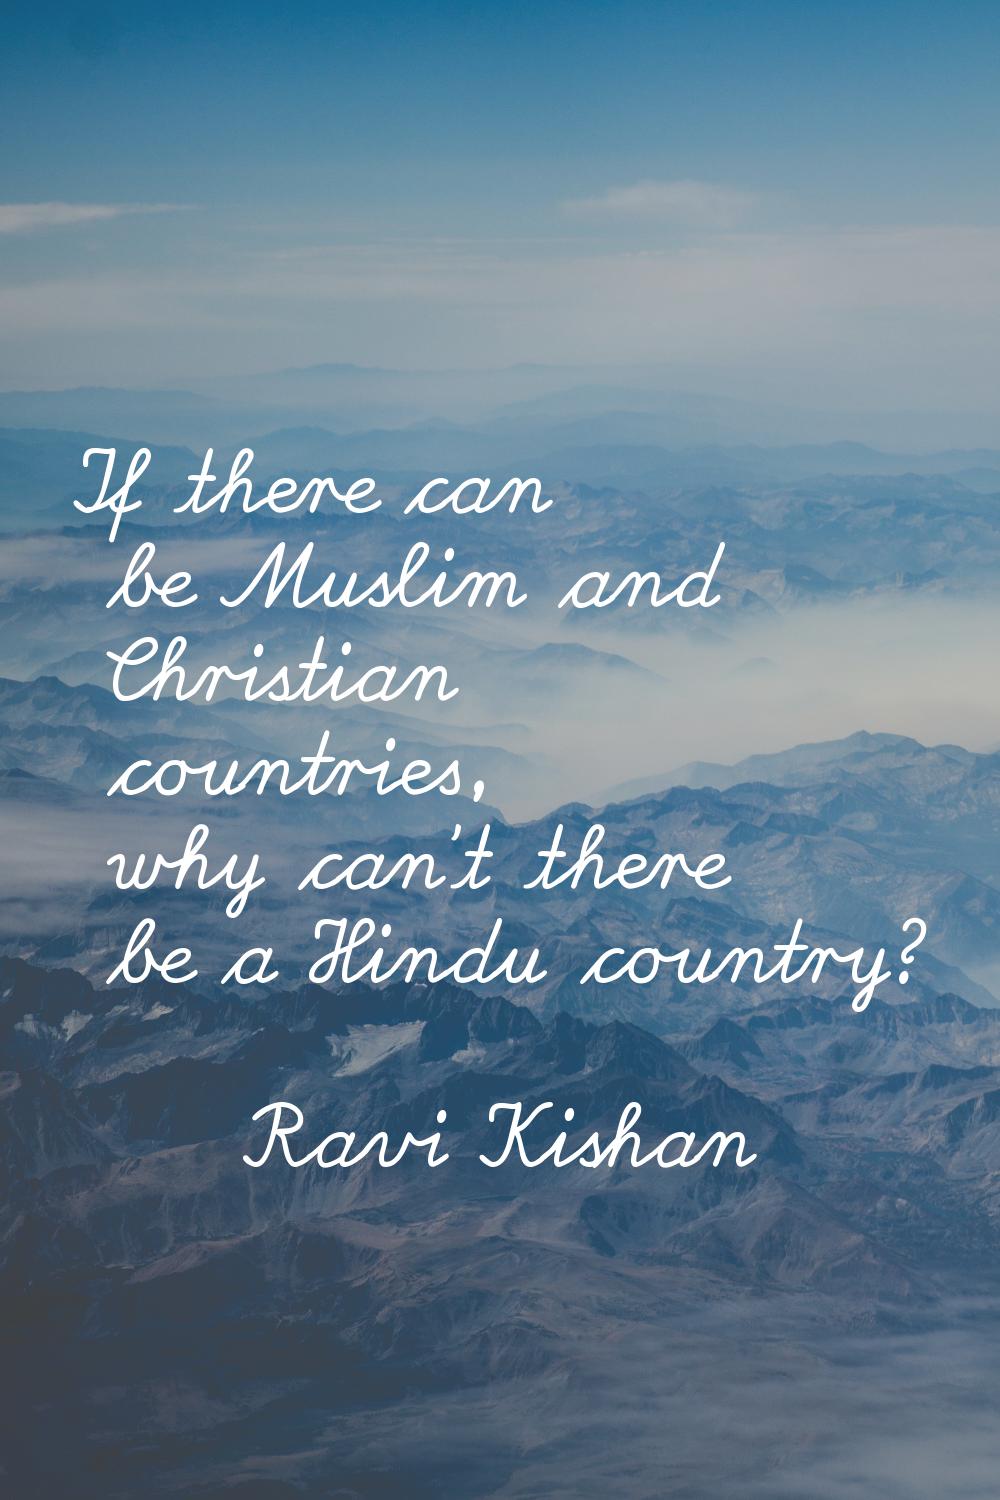 If there can be Muslim and Christian countries, why can't there be a Hindu country?